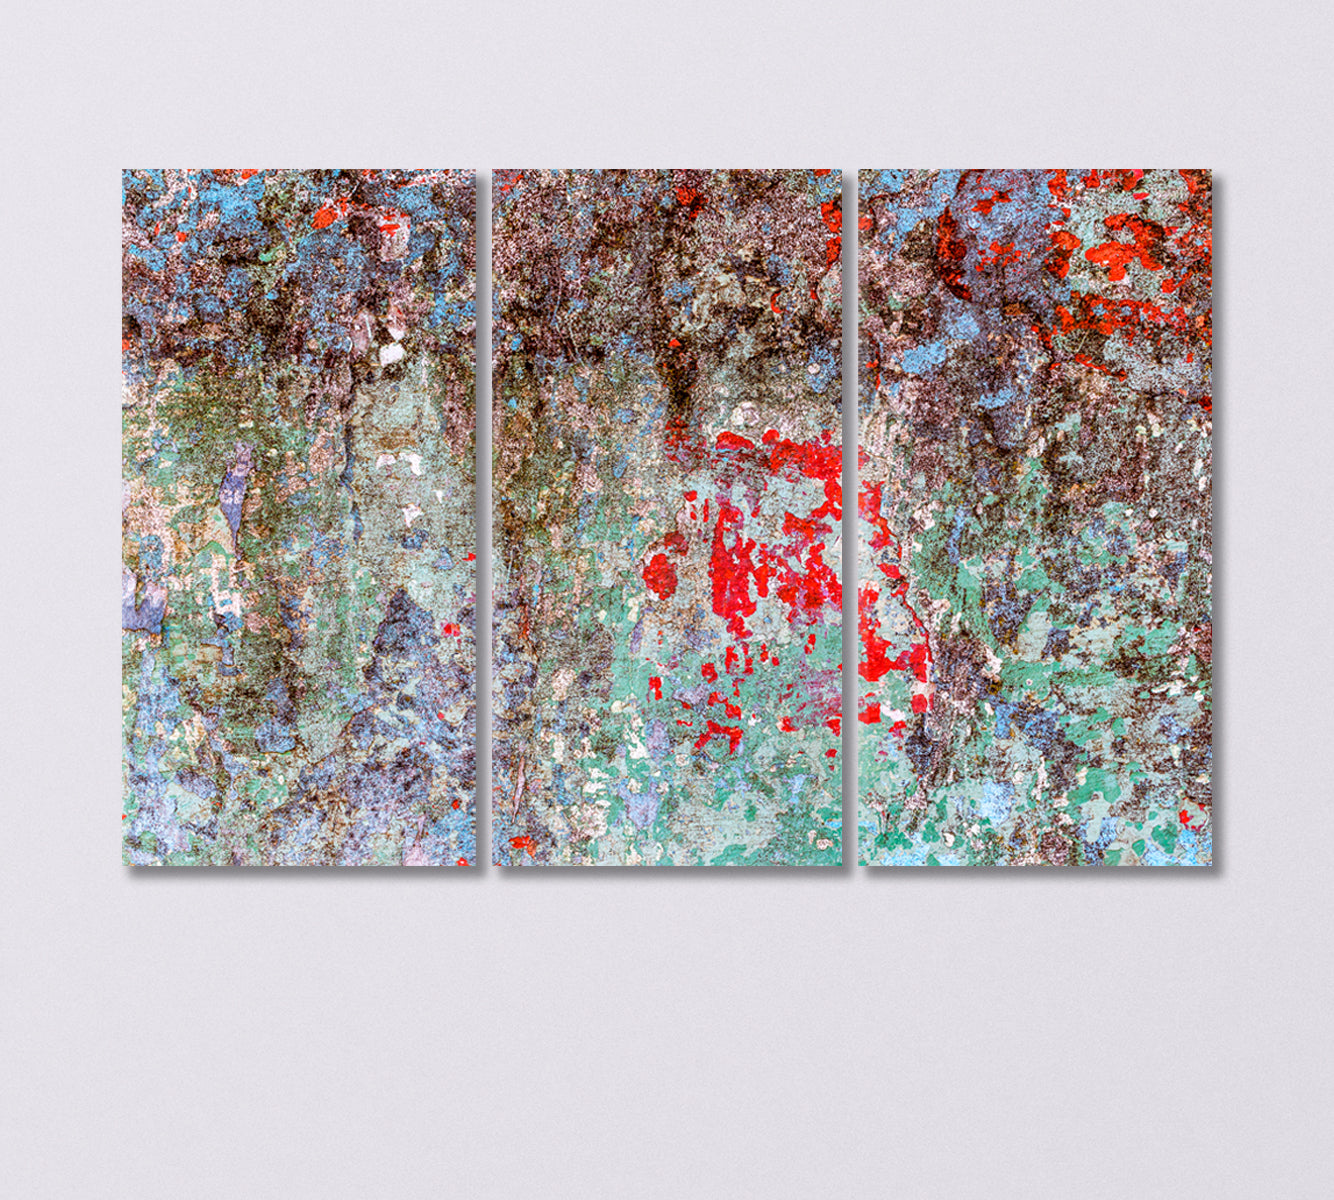 Abstract Cracked Wall Effect Canvas Print-Canvas Print-CetArt-3 Panels-36x24 inches-CetArt